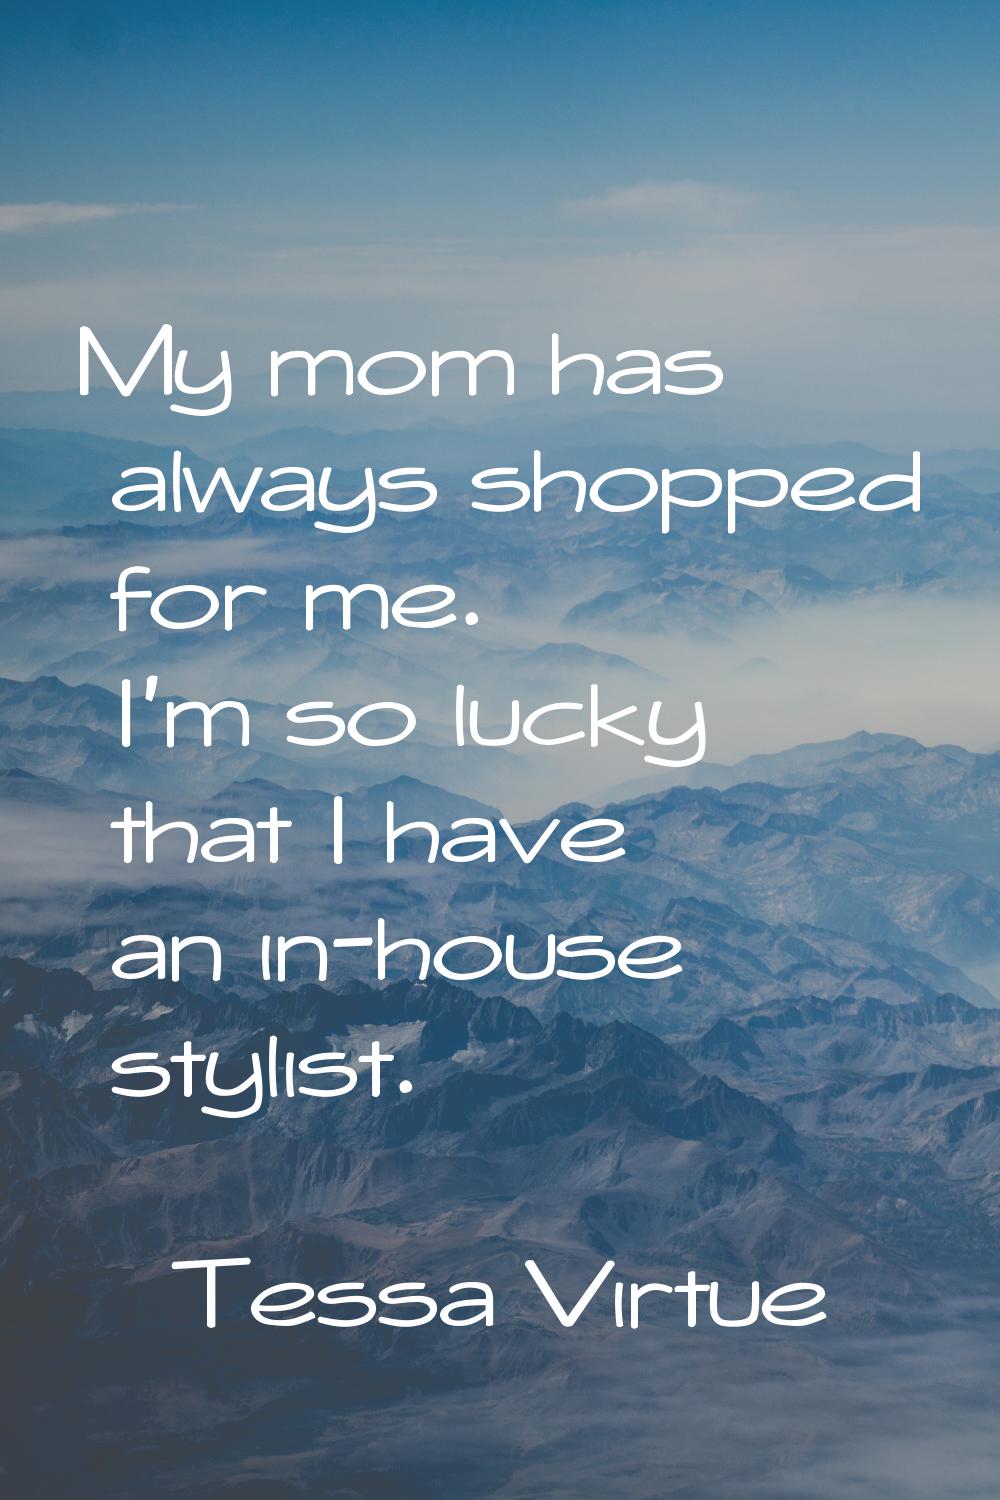 My mom has always shopped for me. I'm so lucky that I have an in-house stylist.